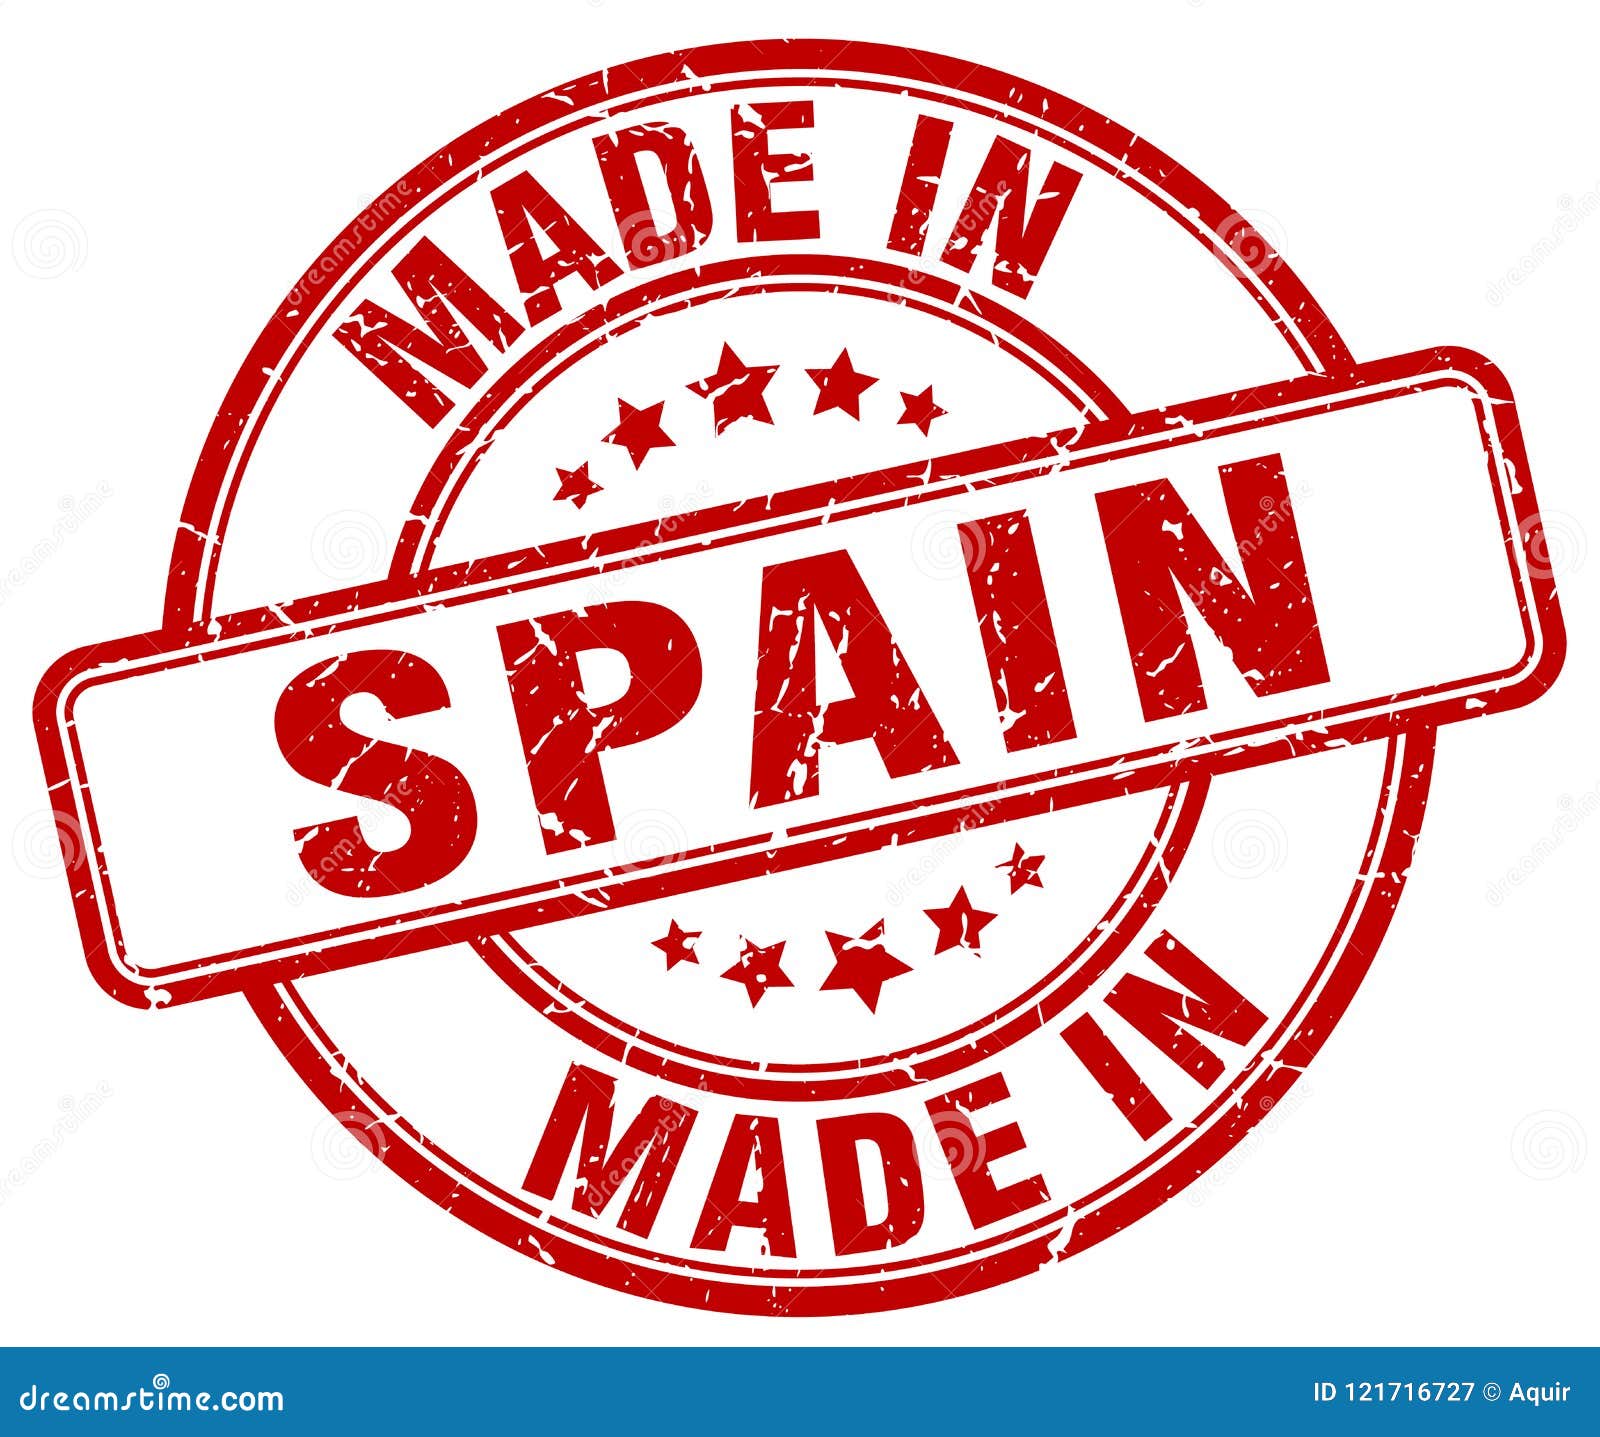 Made in Spain stamp stock vector. Illustration of isolated - 121716727